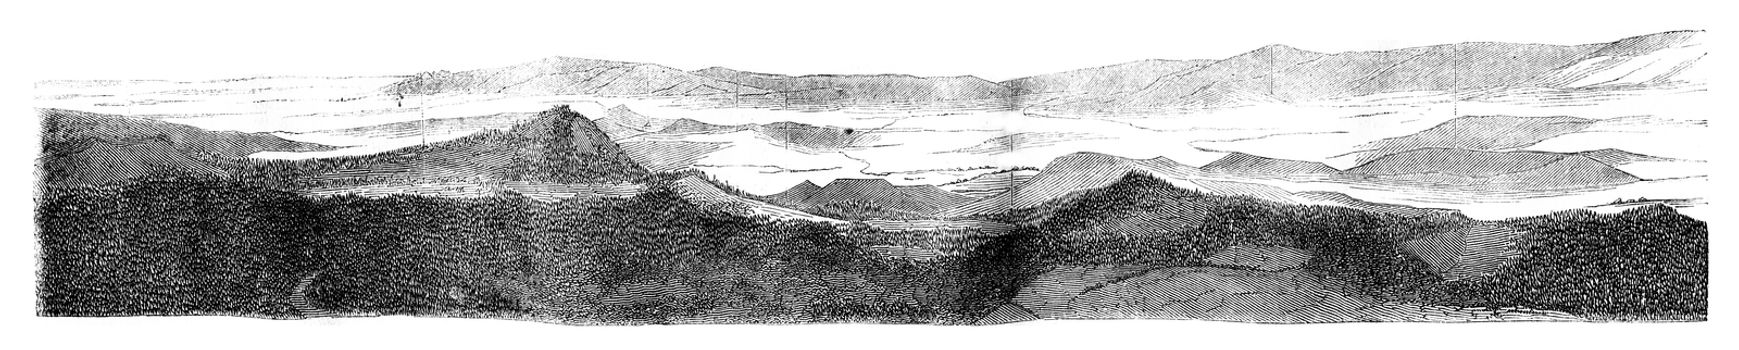 View of the west side, vintage engraved illustration. Magasin Pittoresque 1846.
